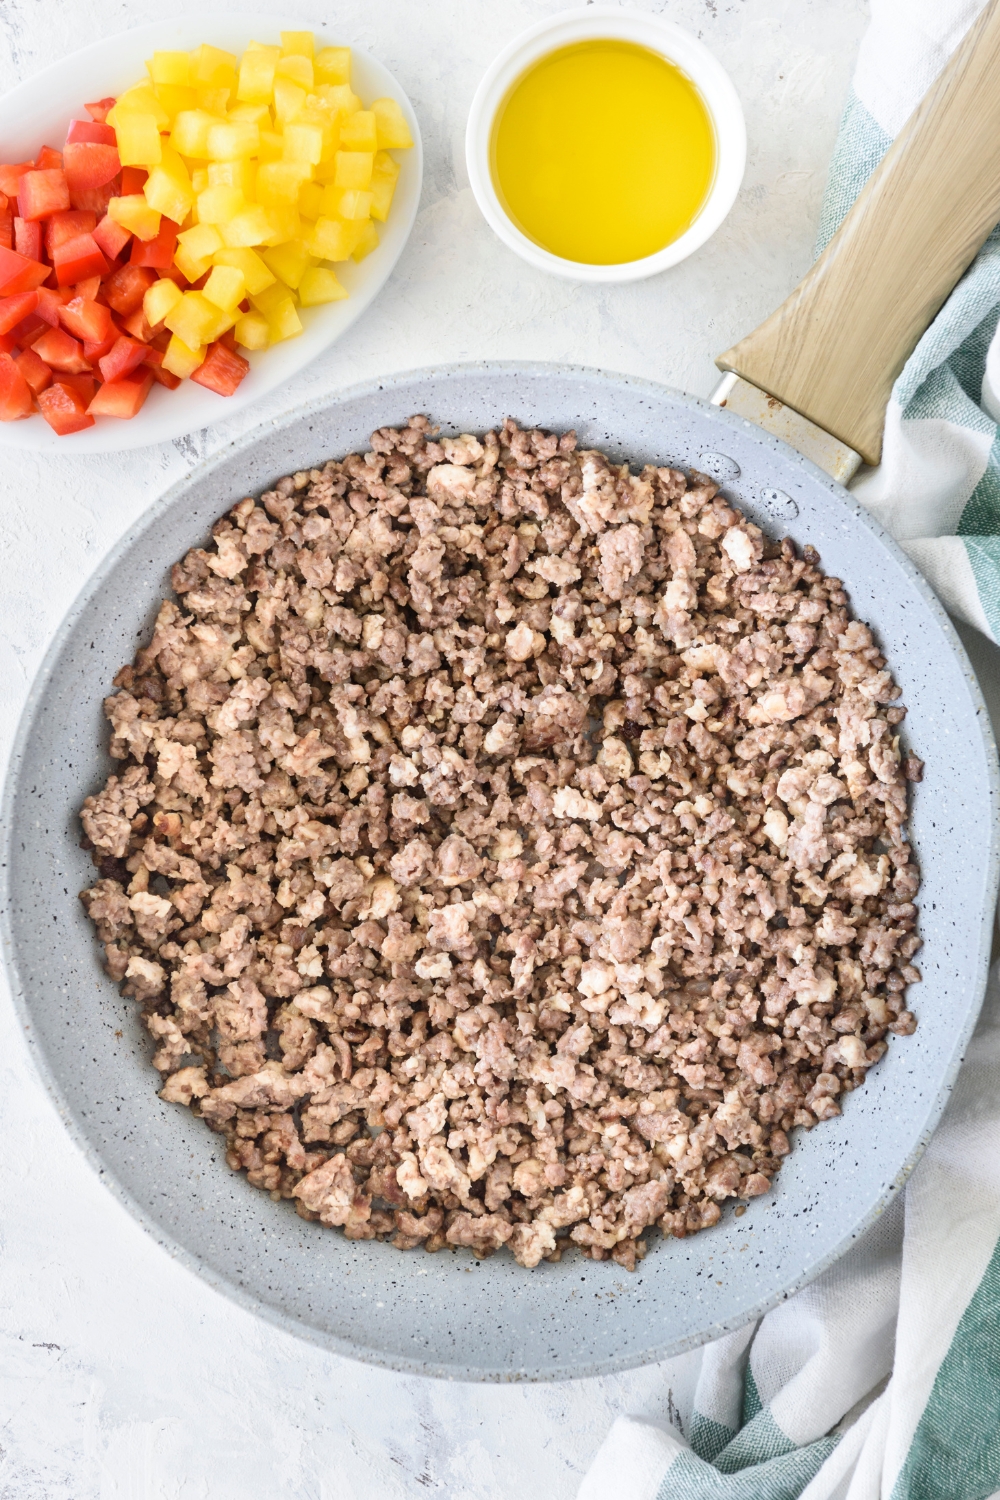 A skillet filled with cooked ground beef.